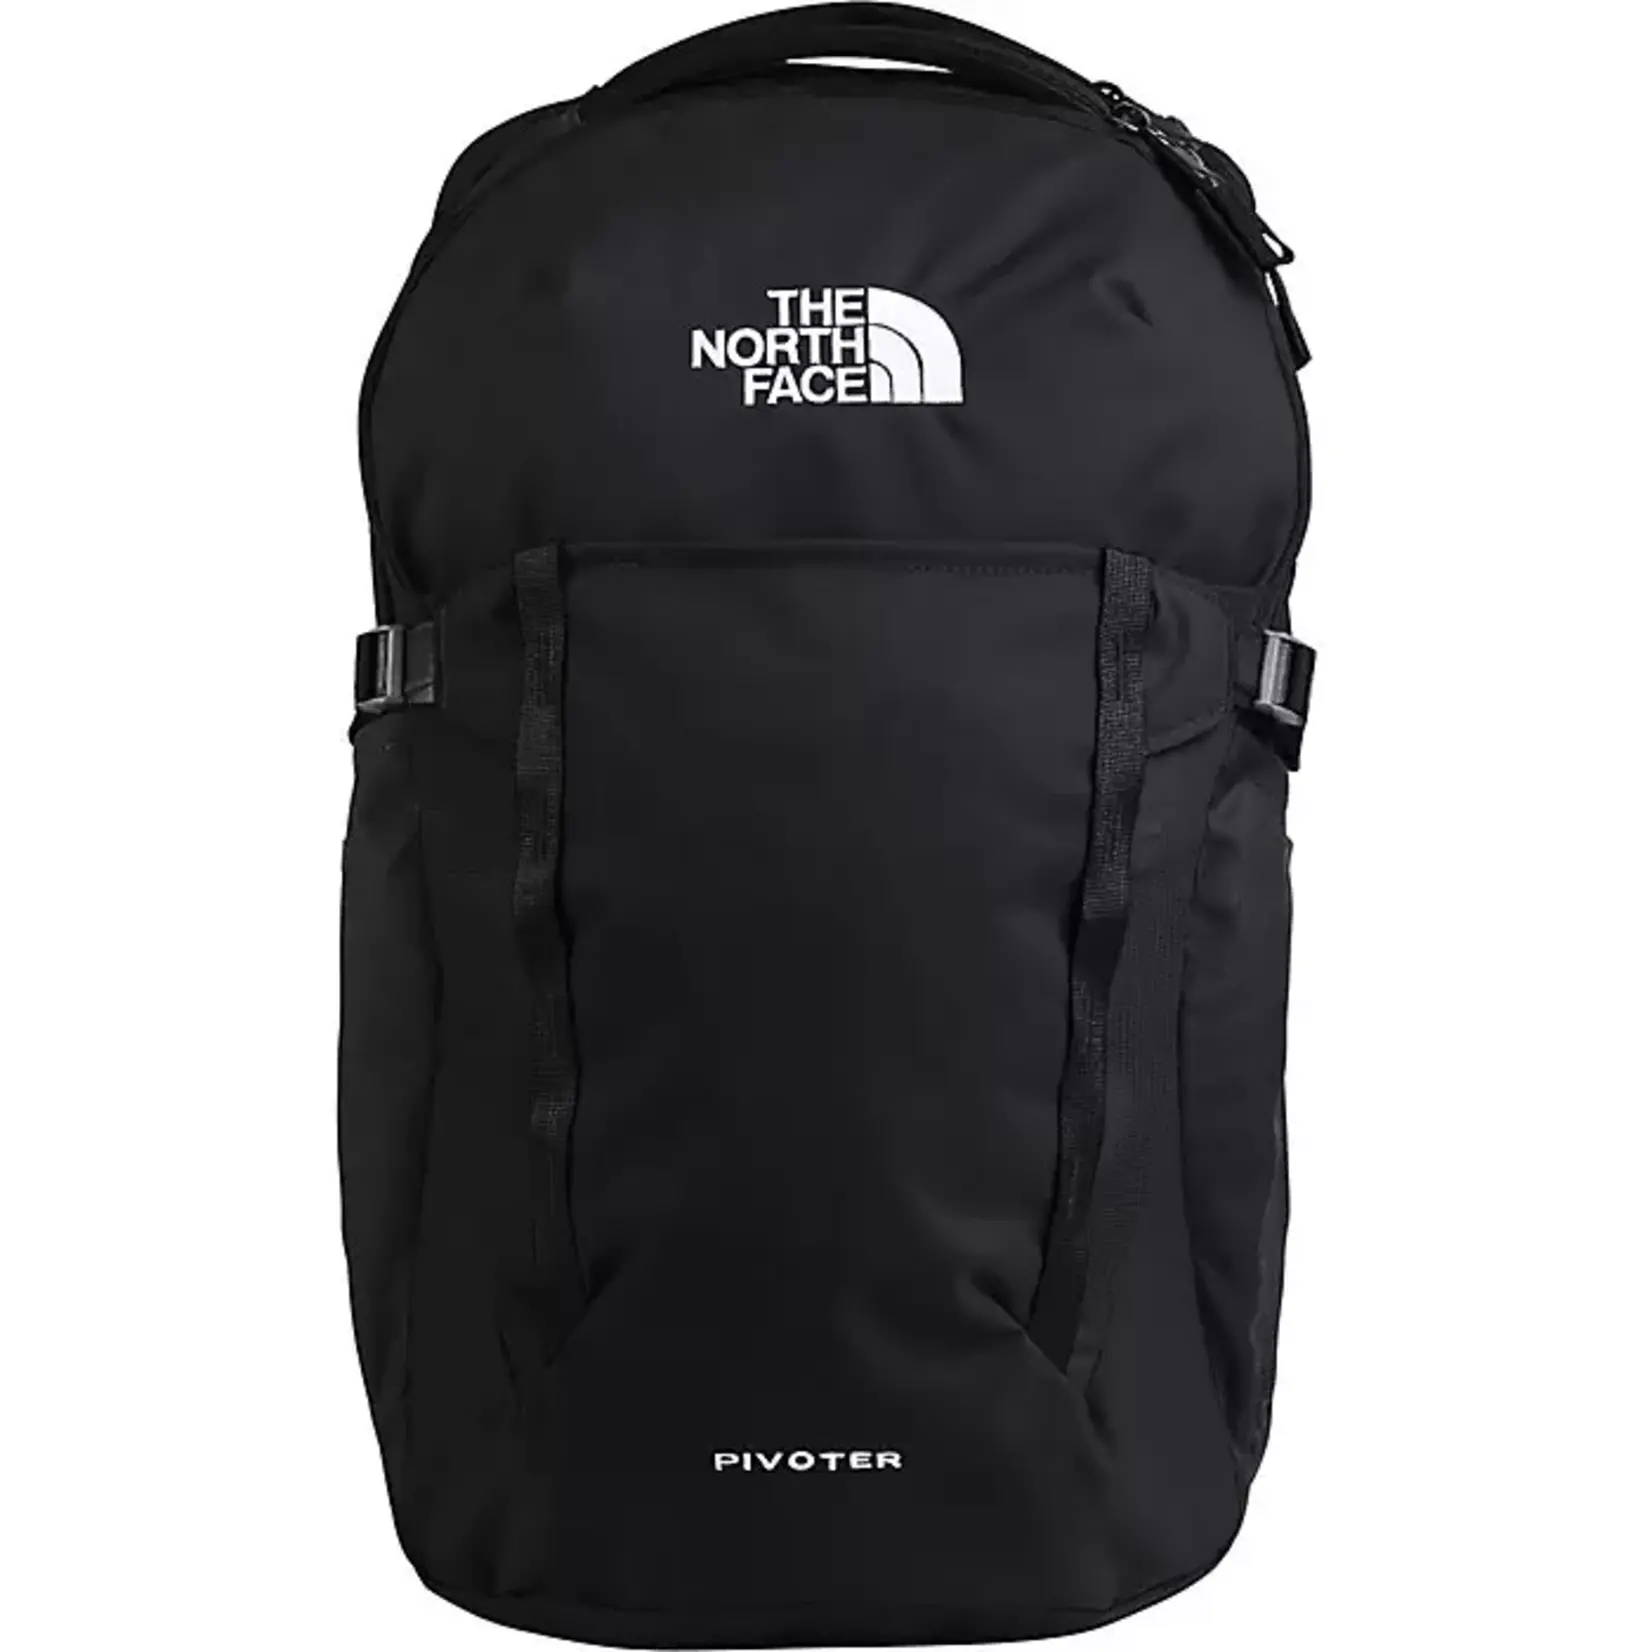 THE NORTH FACE PIVOTER